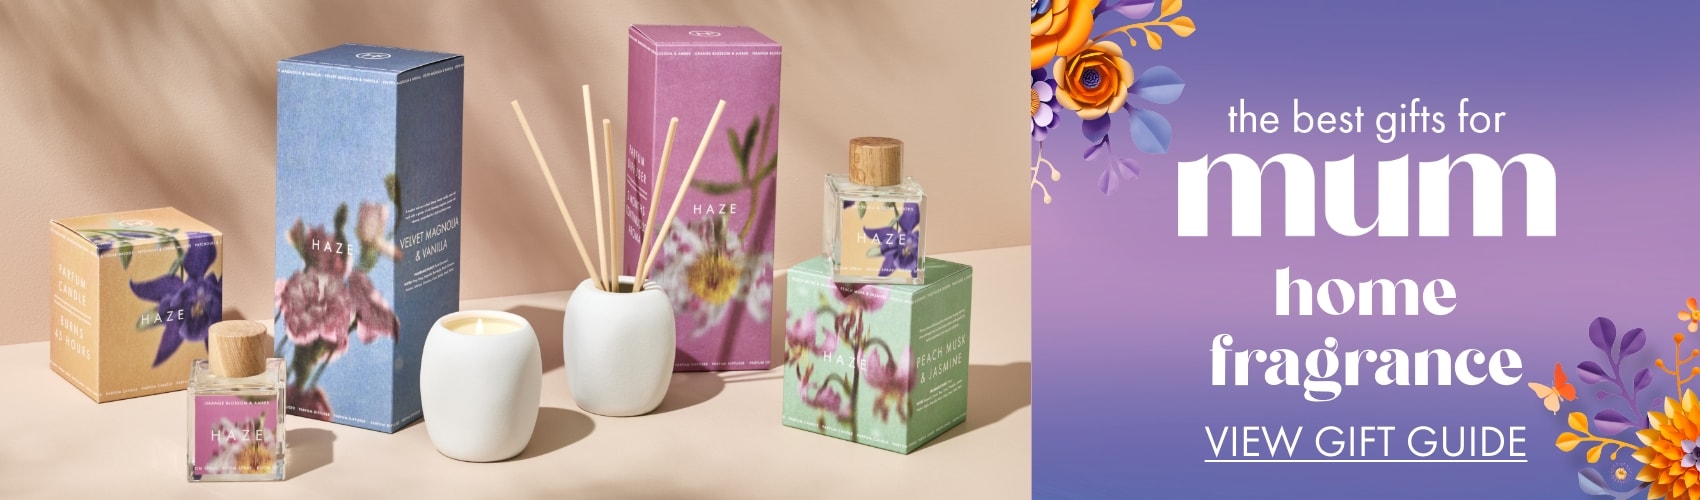 The best gifts for mum - home fragrance